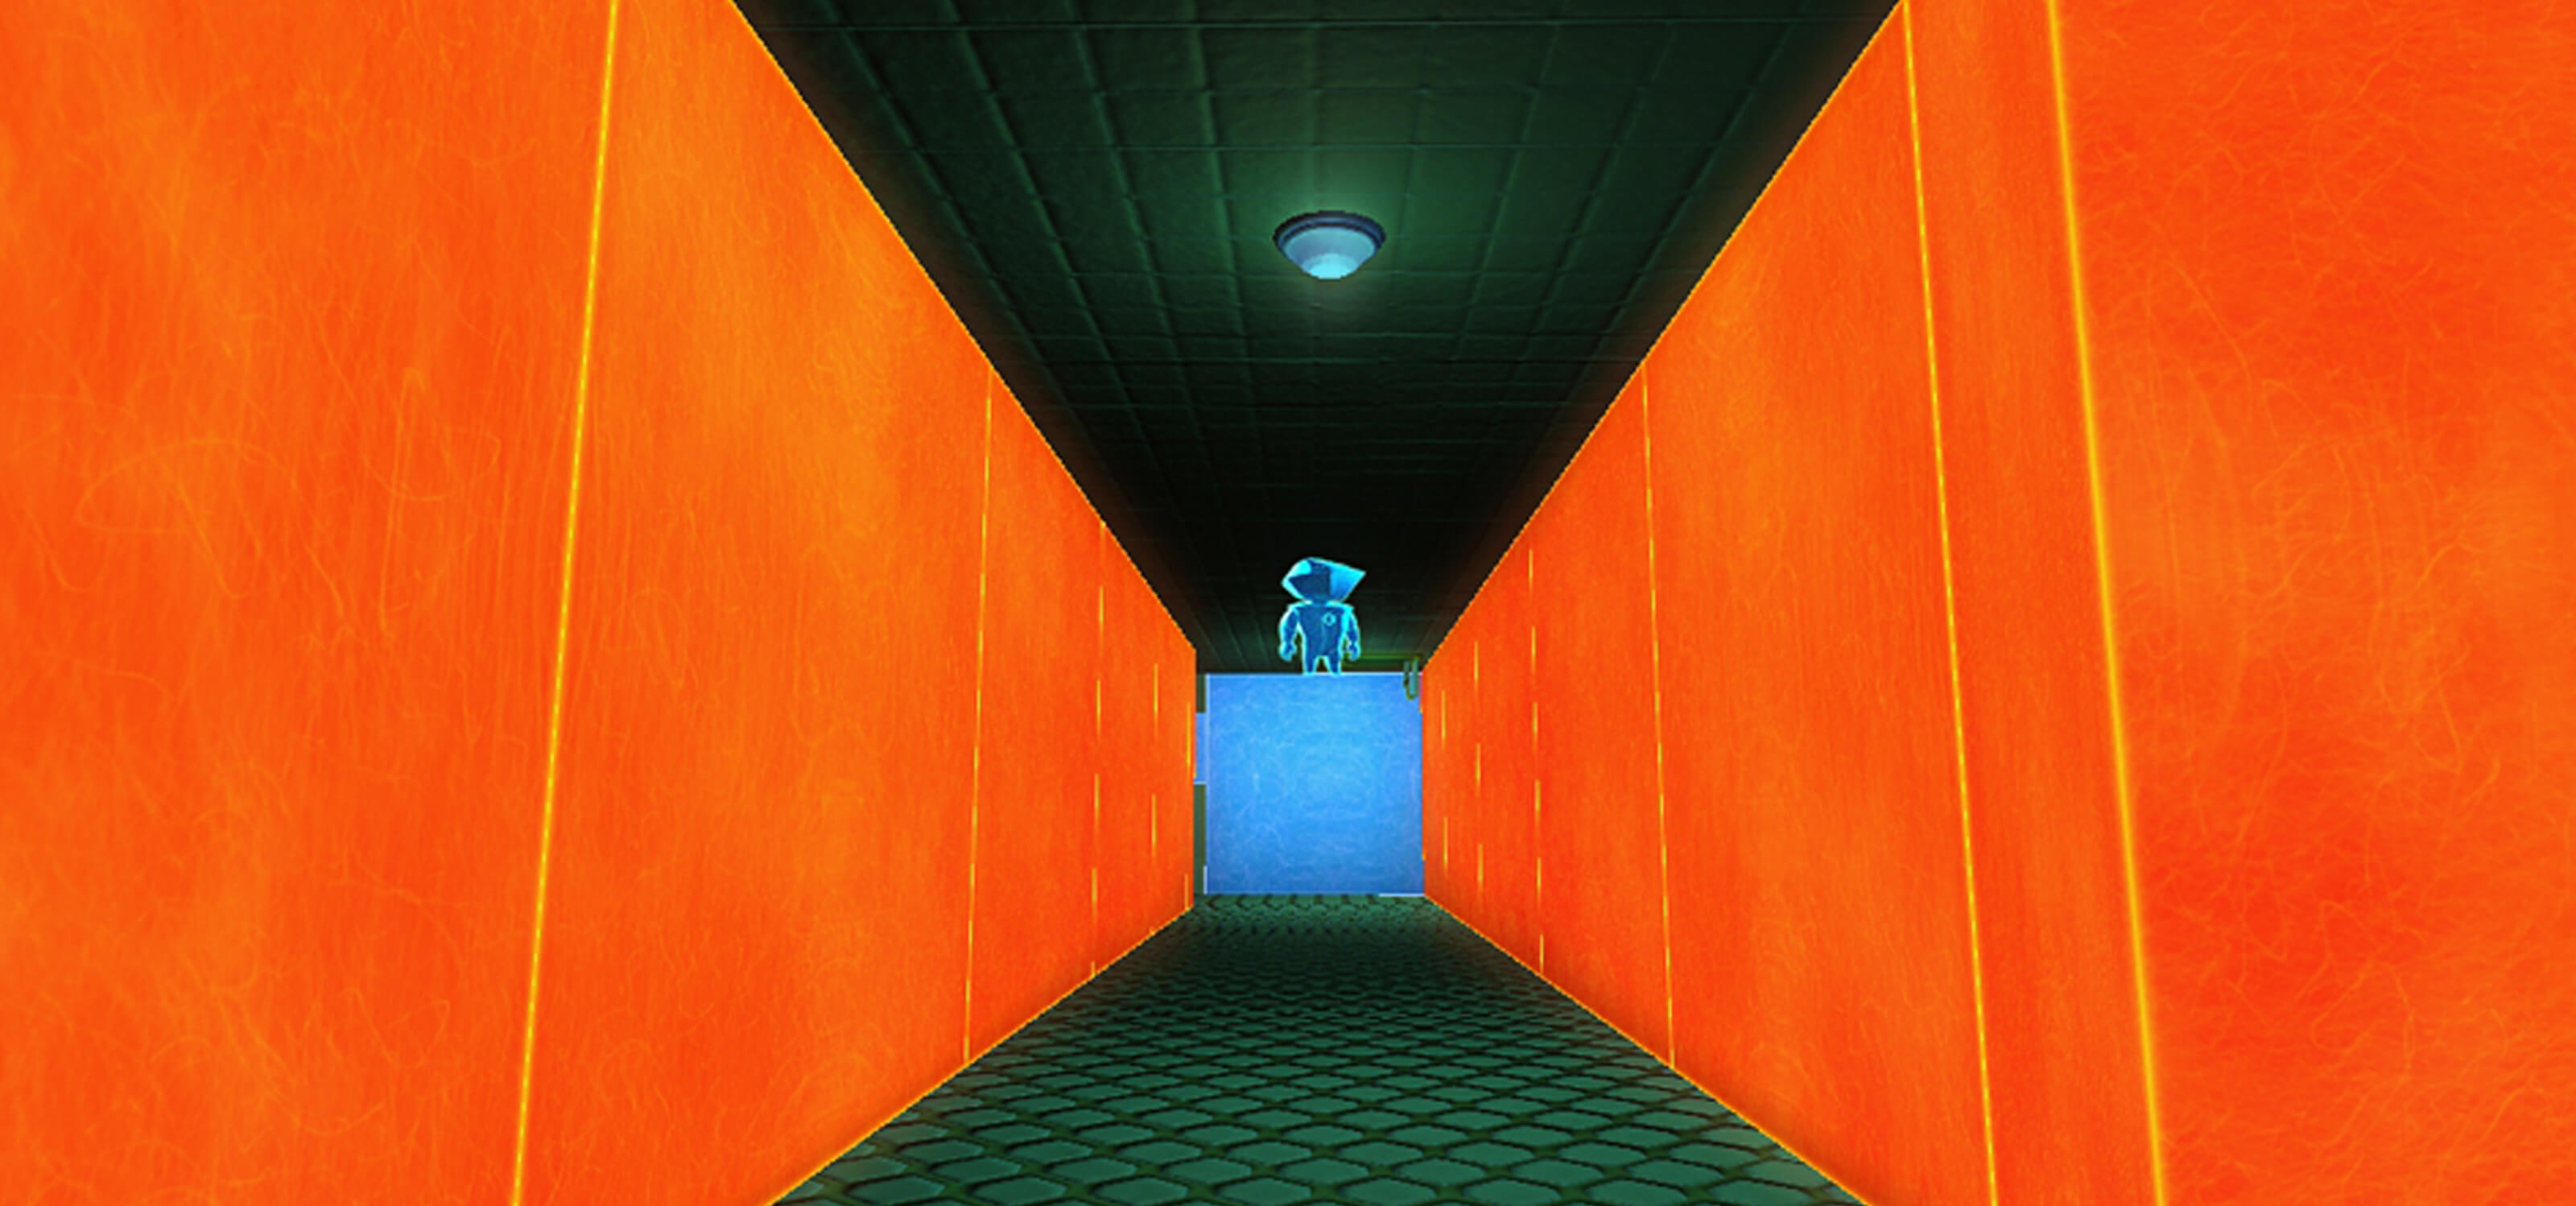 The player's blue avatar stands atop a blue block surrounded by orange walls